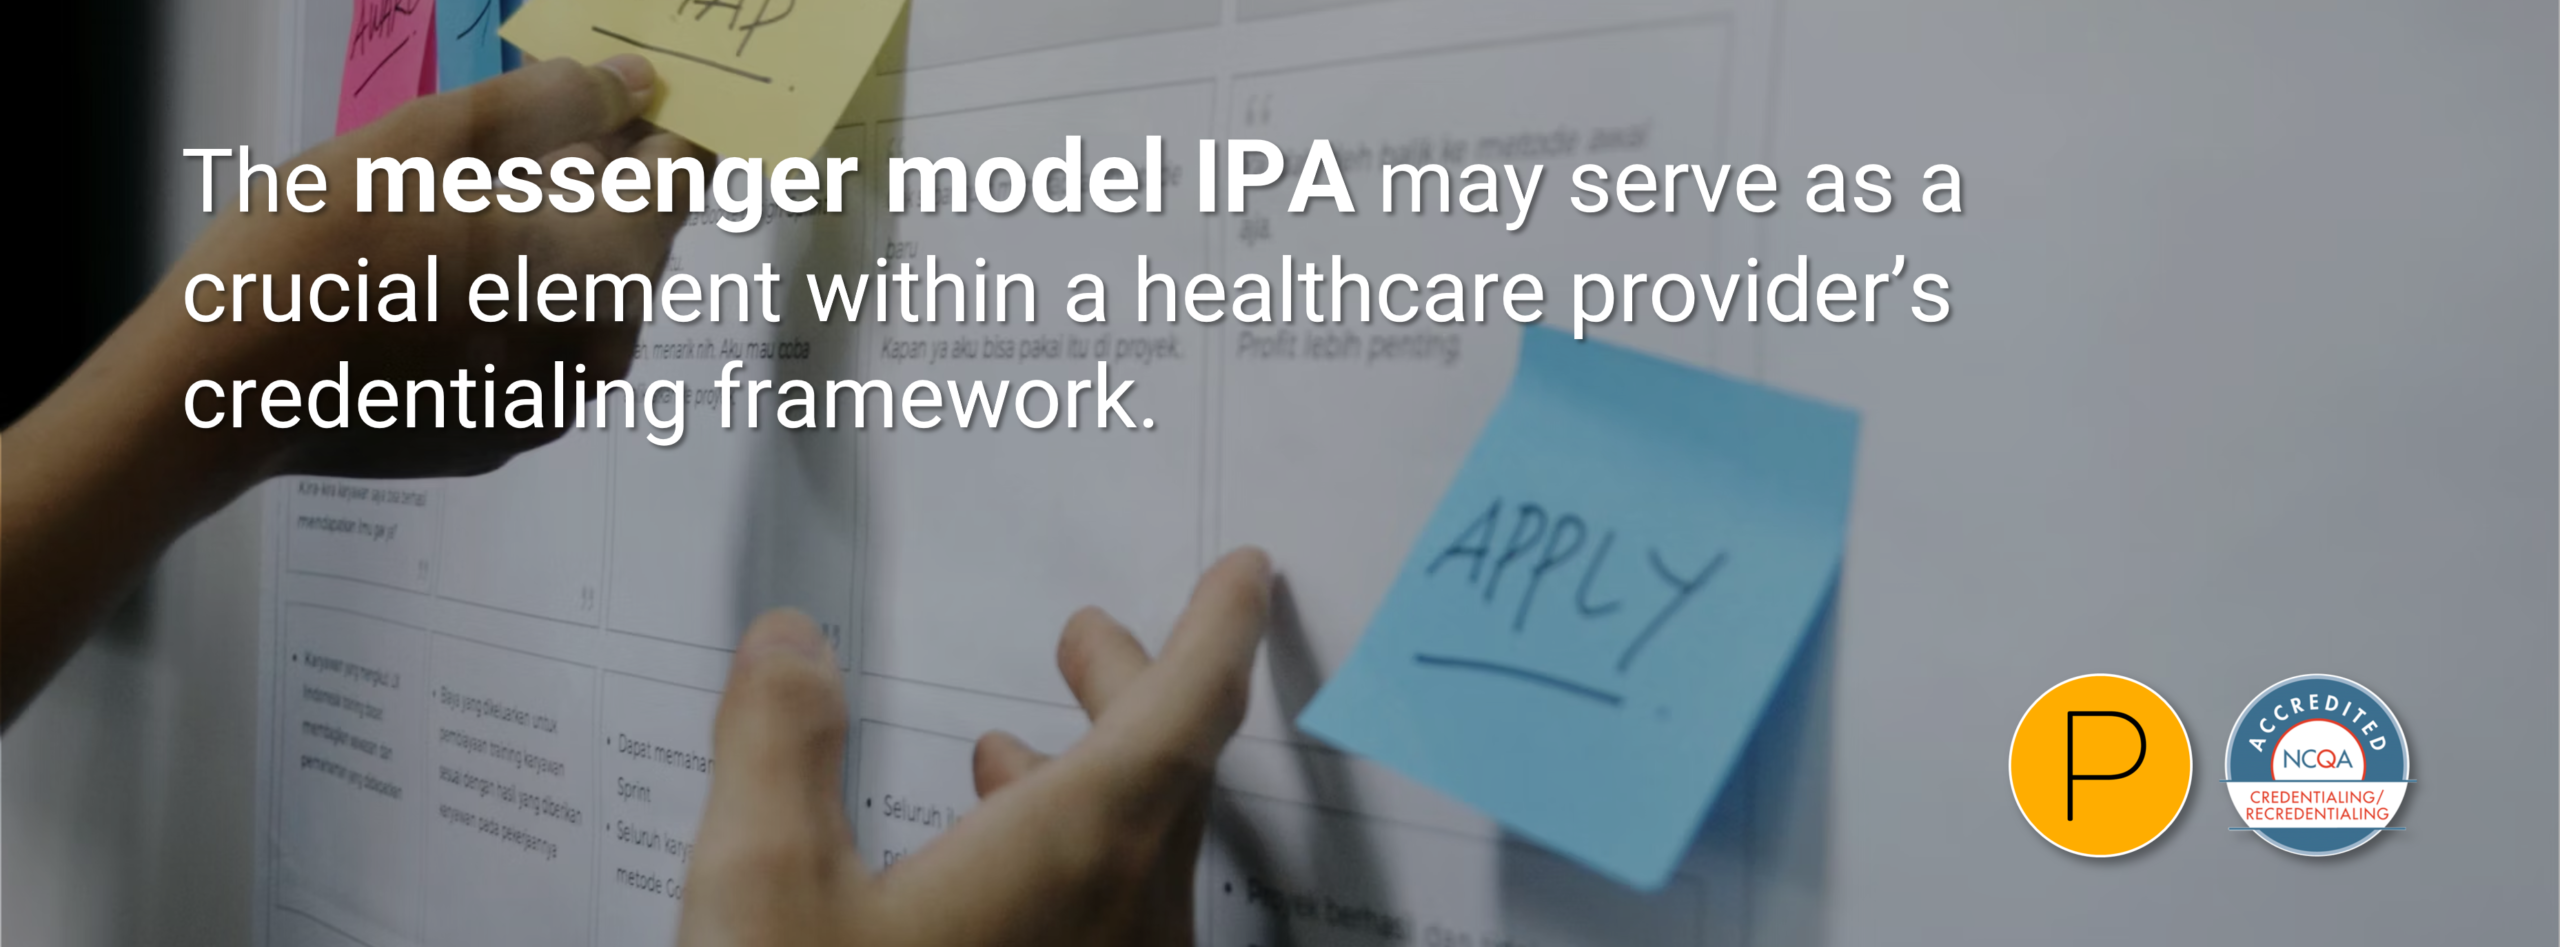 Messenger Model IPAs Important Role In Credentialing